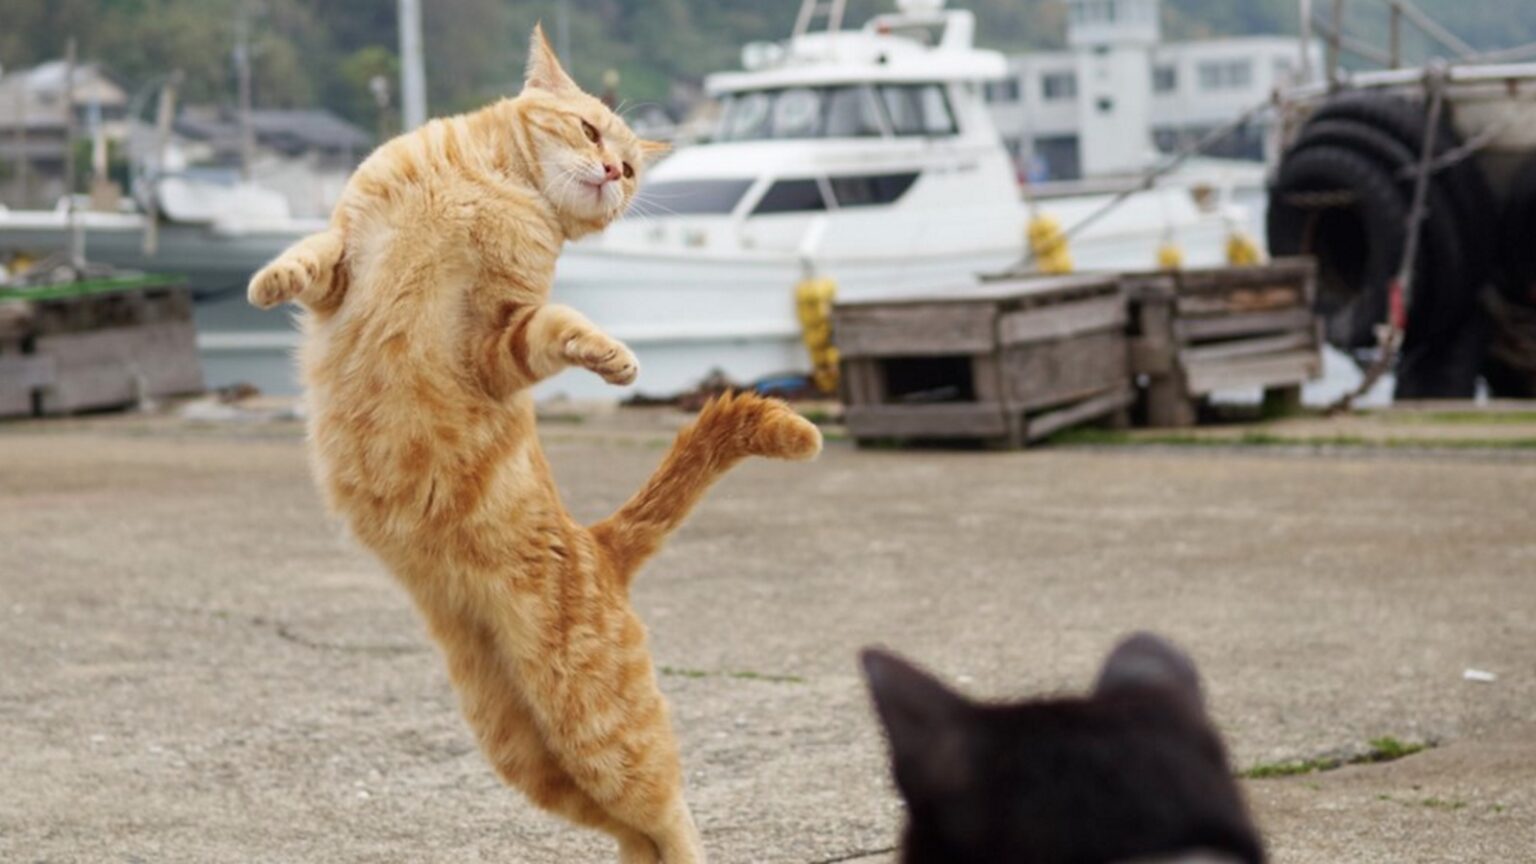 If we lived in a world without cat videos, would YouTube even exist? Dance along with these adorable dancing cat videos.